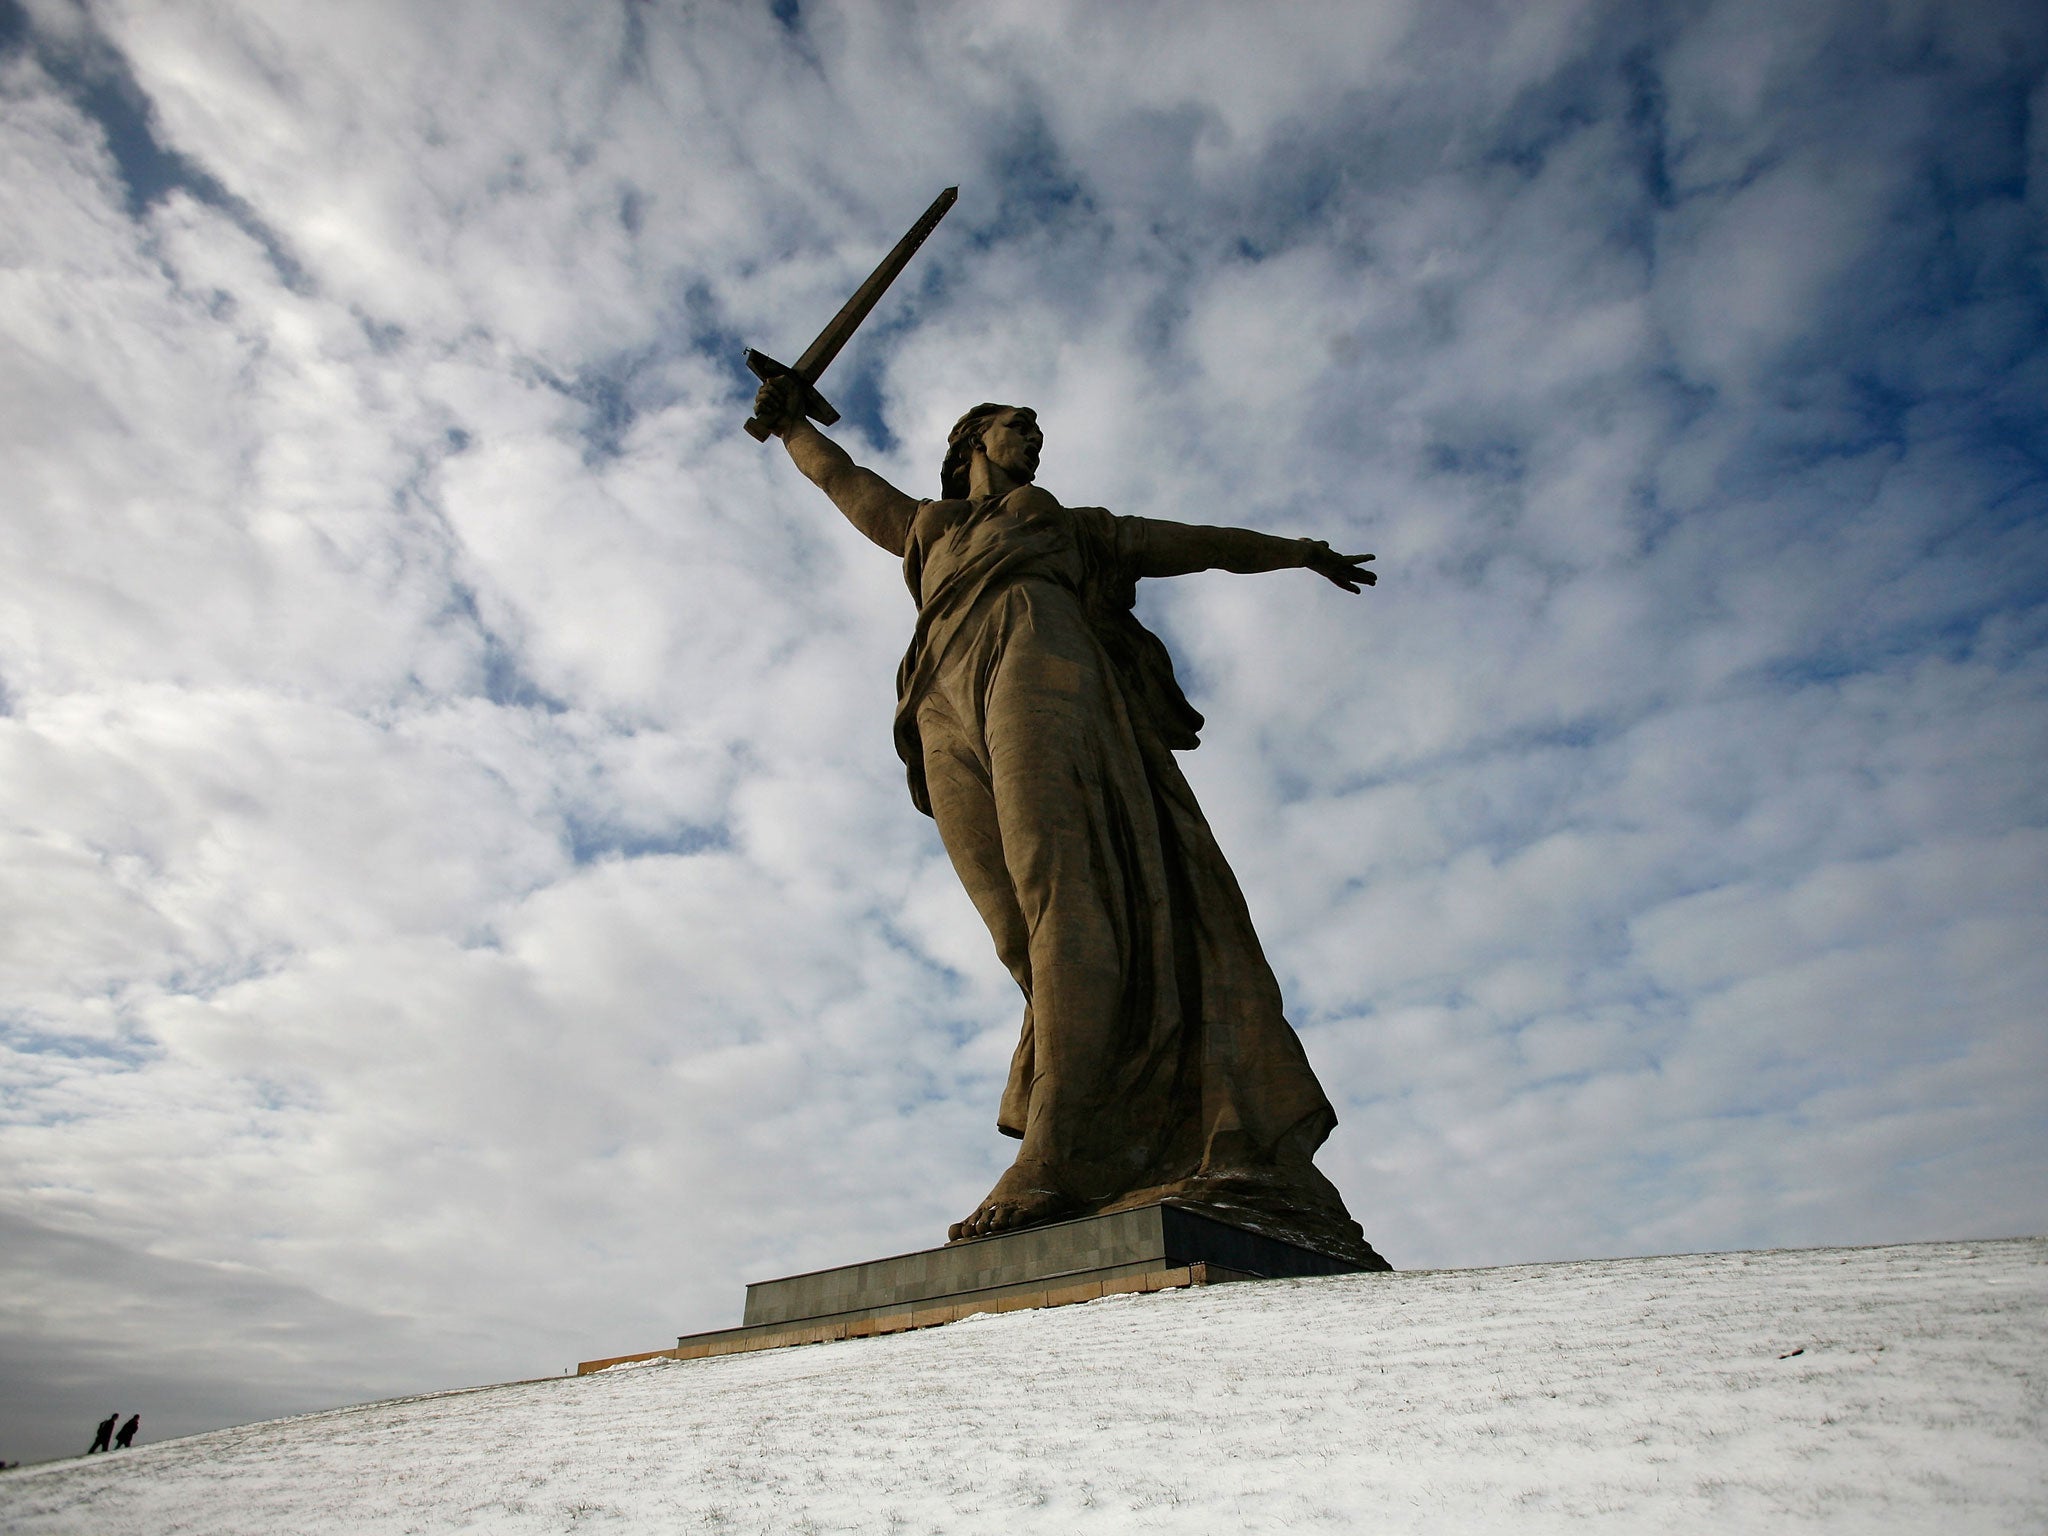 A general view of the 85 metre tall statue 'The Motherland is Calling' which stands atop Mamayev Kurgan on November 16, 2011 in Volgograd, Russia.